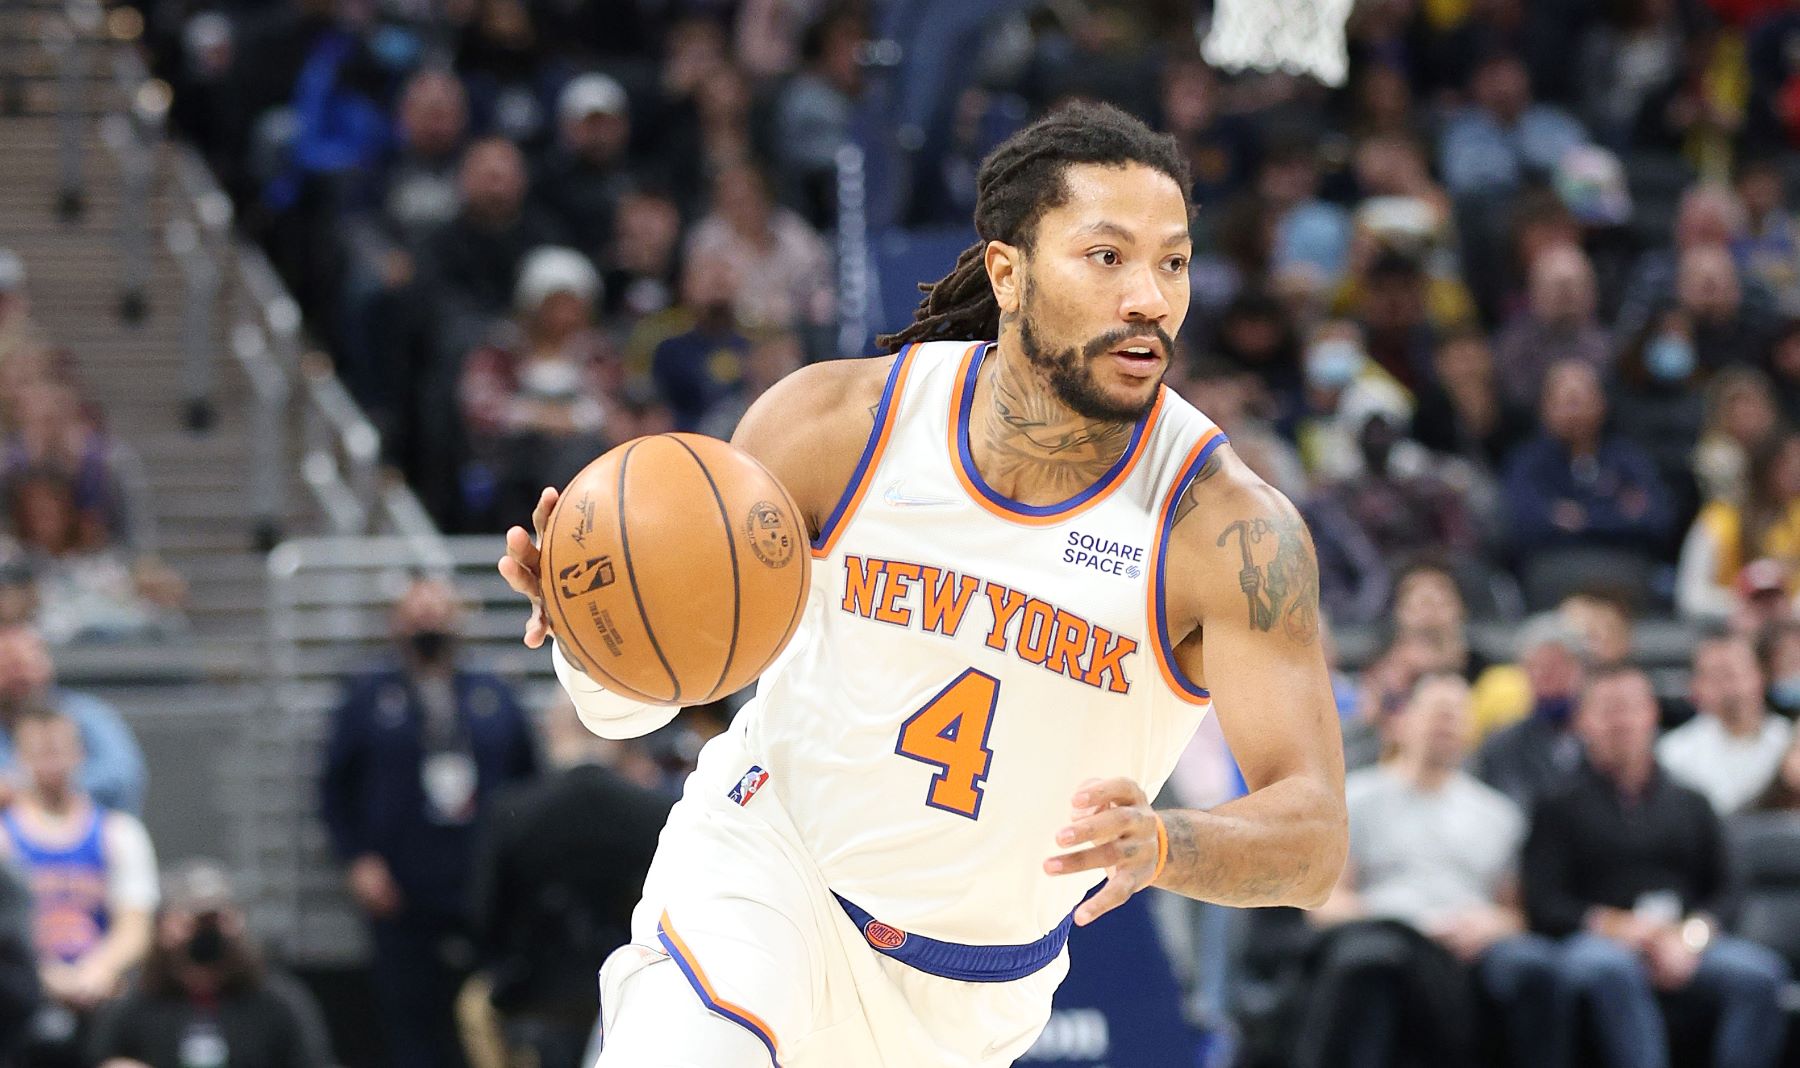 Derrick Rose #5 on the New York Knicks against the Indiana Pacers in Indianapolis, Indiana